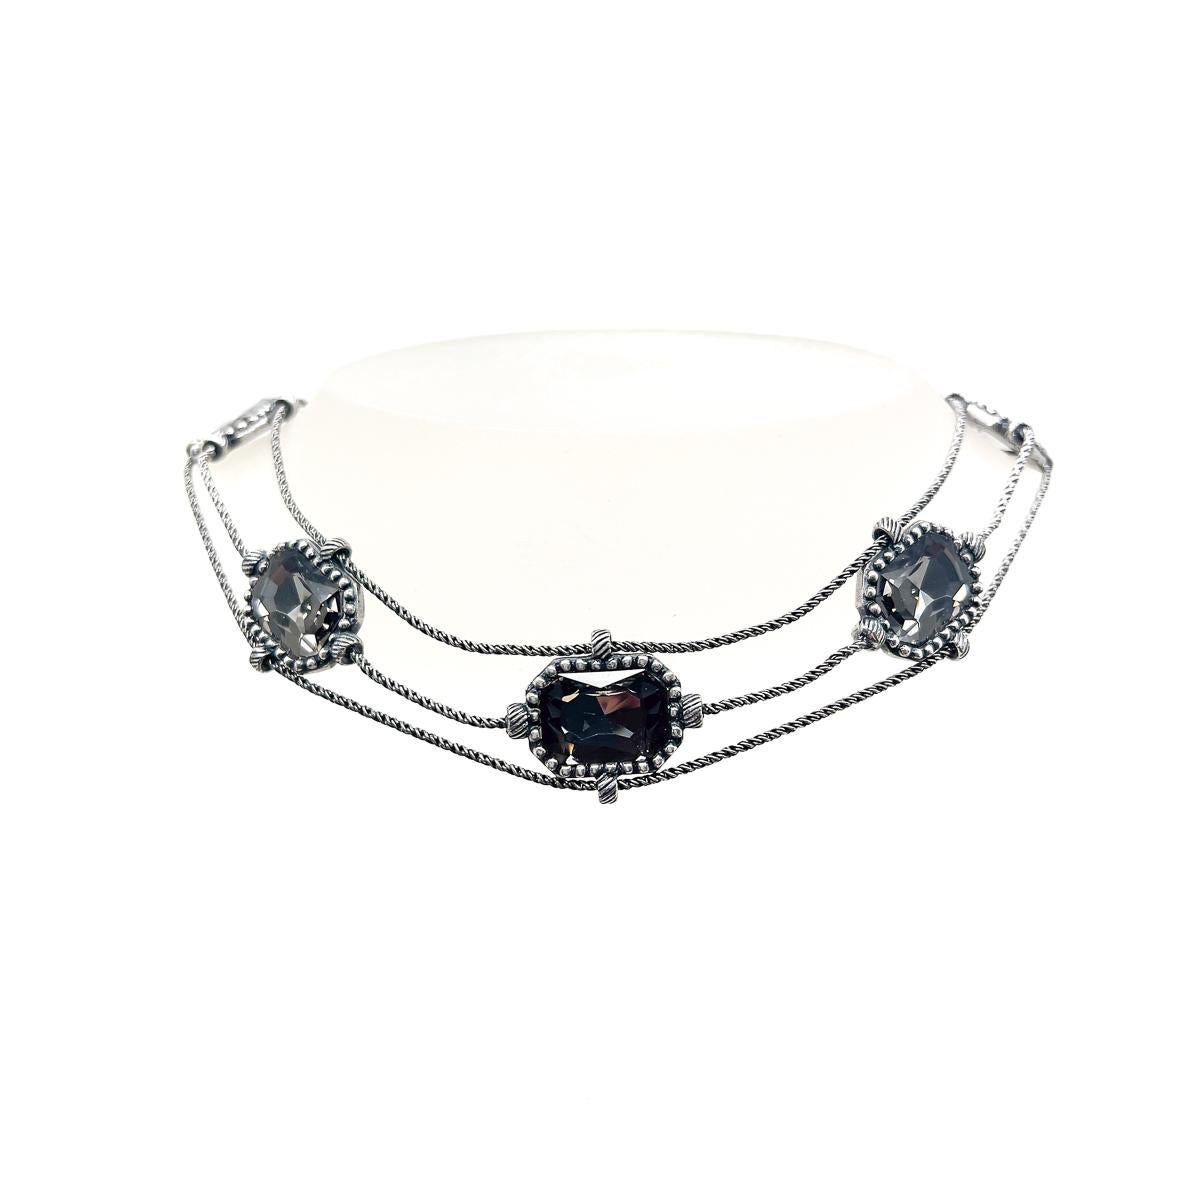 Vintage Christian Dior by Galliano Blackened Crystal Choker 2000s In Good Condition For Sale In Wilmslow, GB